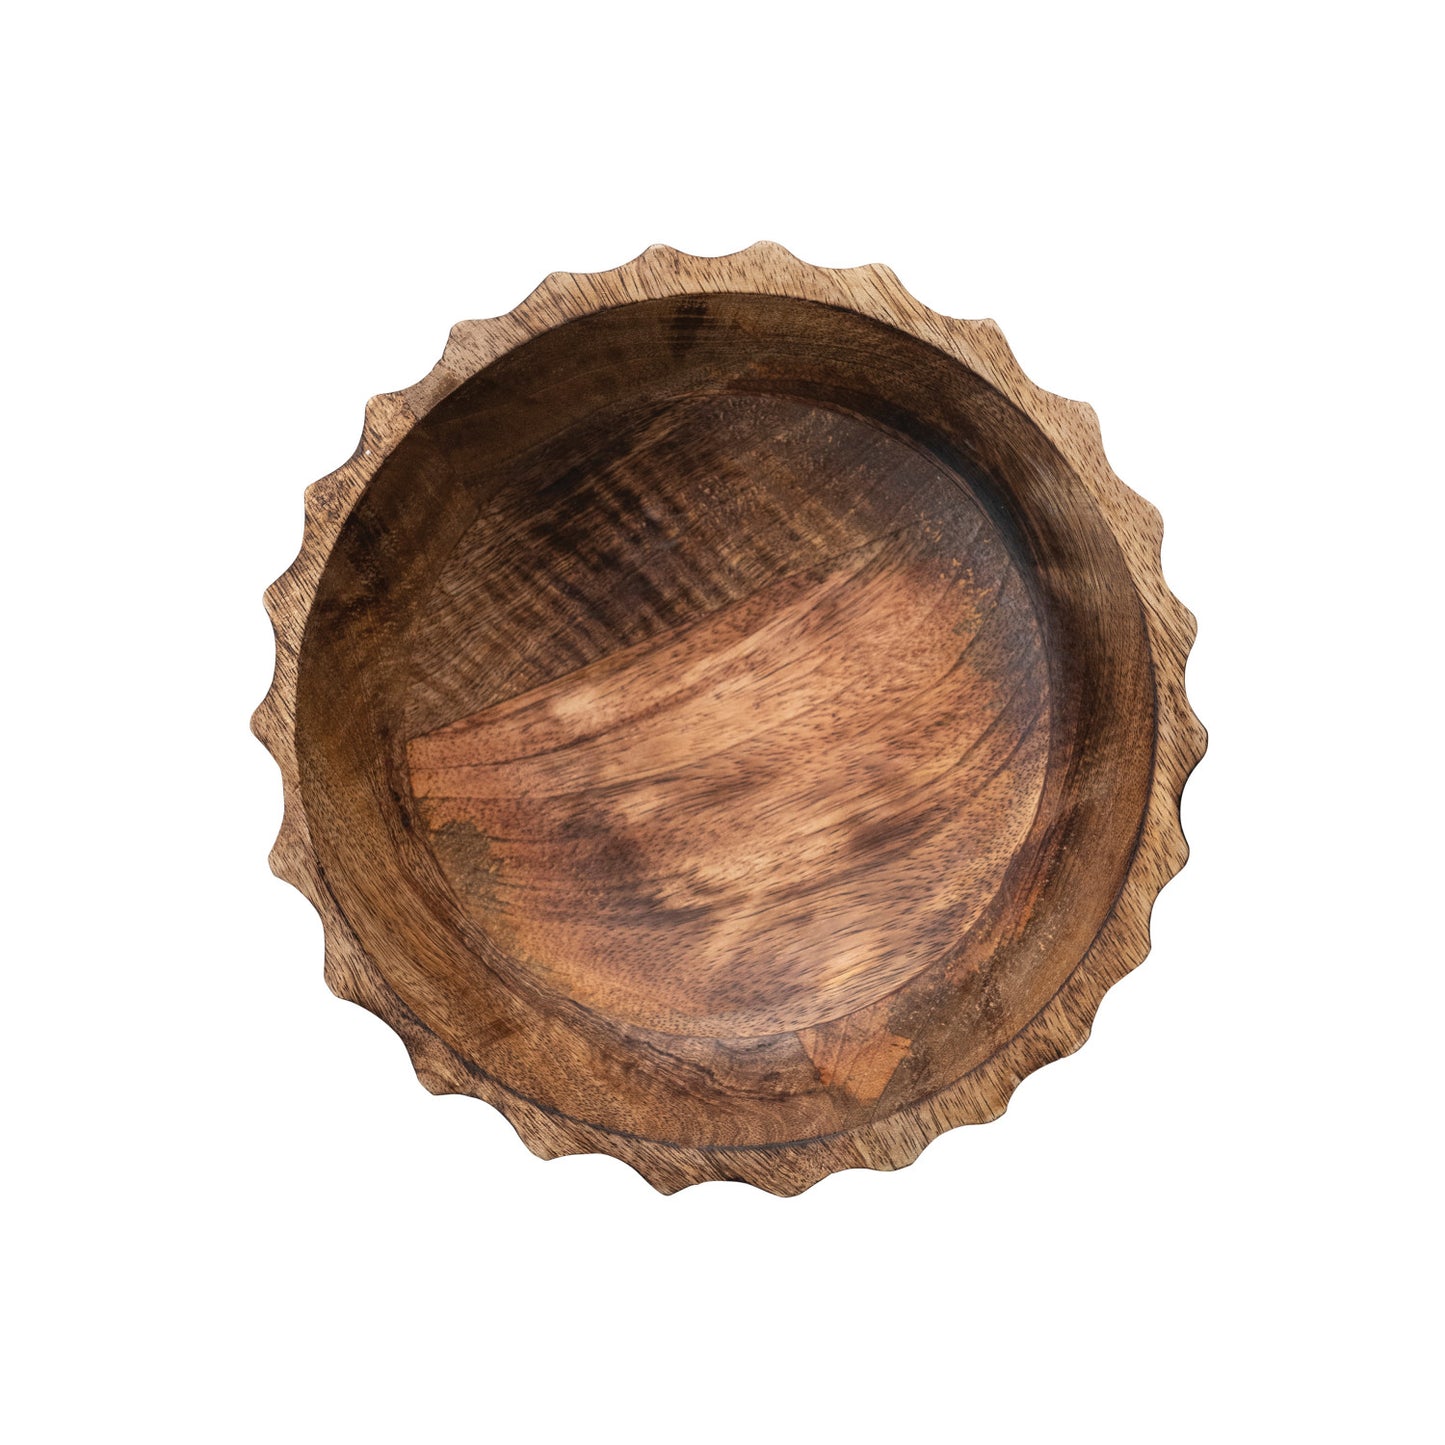 Hand-Carved Mango Wood Footed Bowl w/ Scalloped Edge